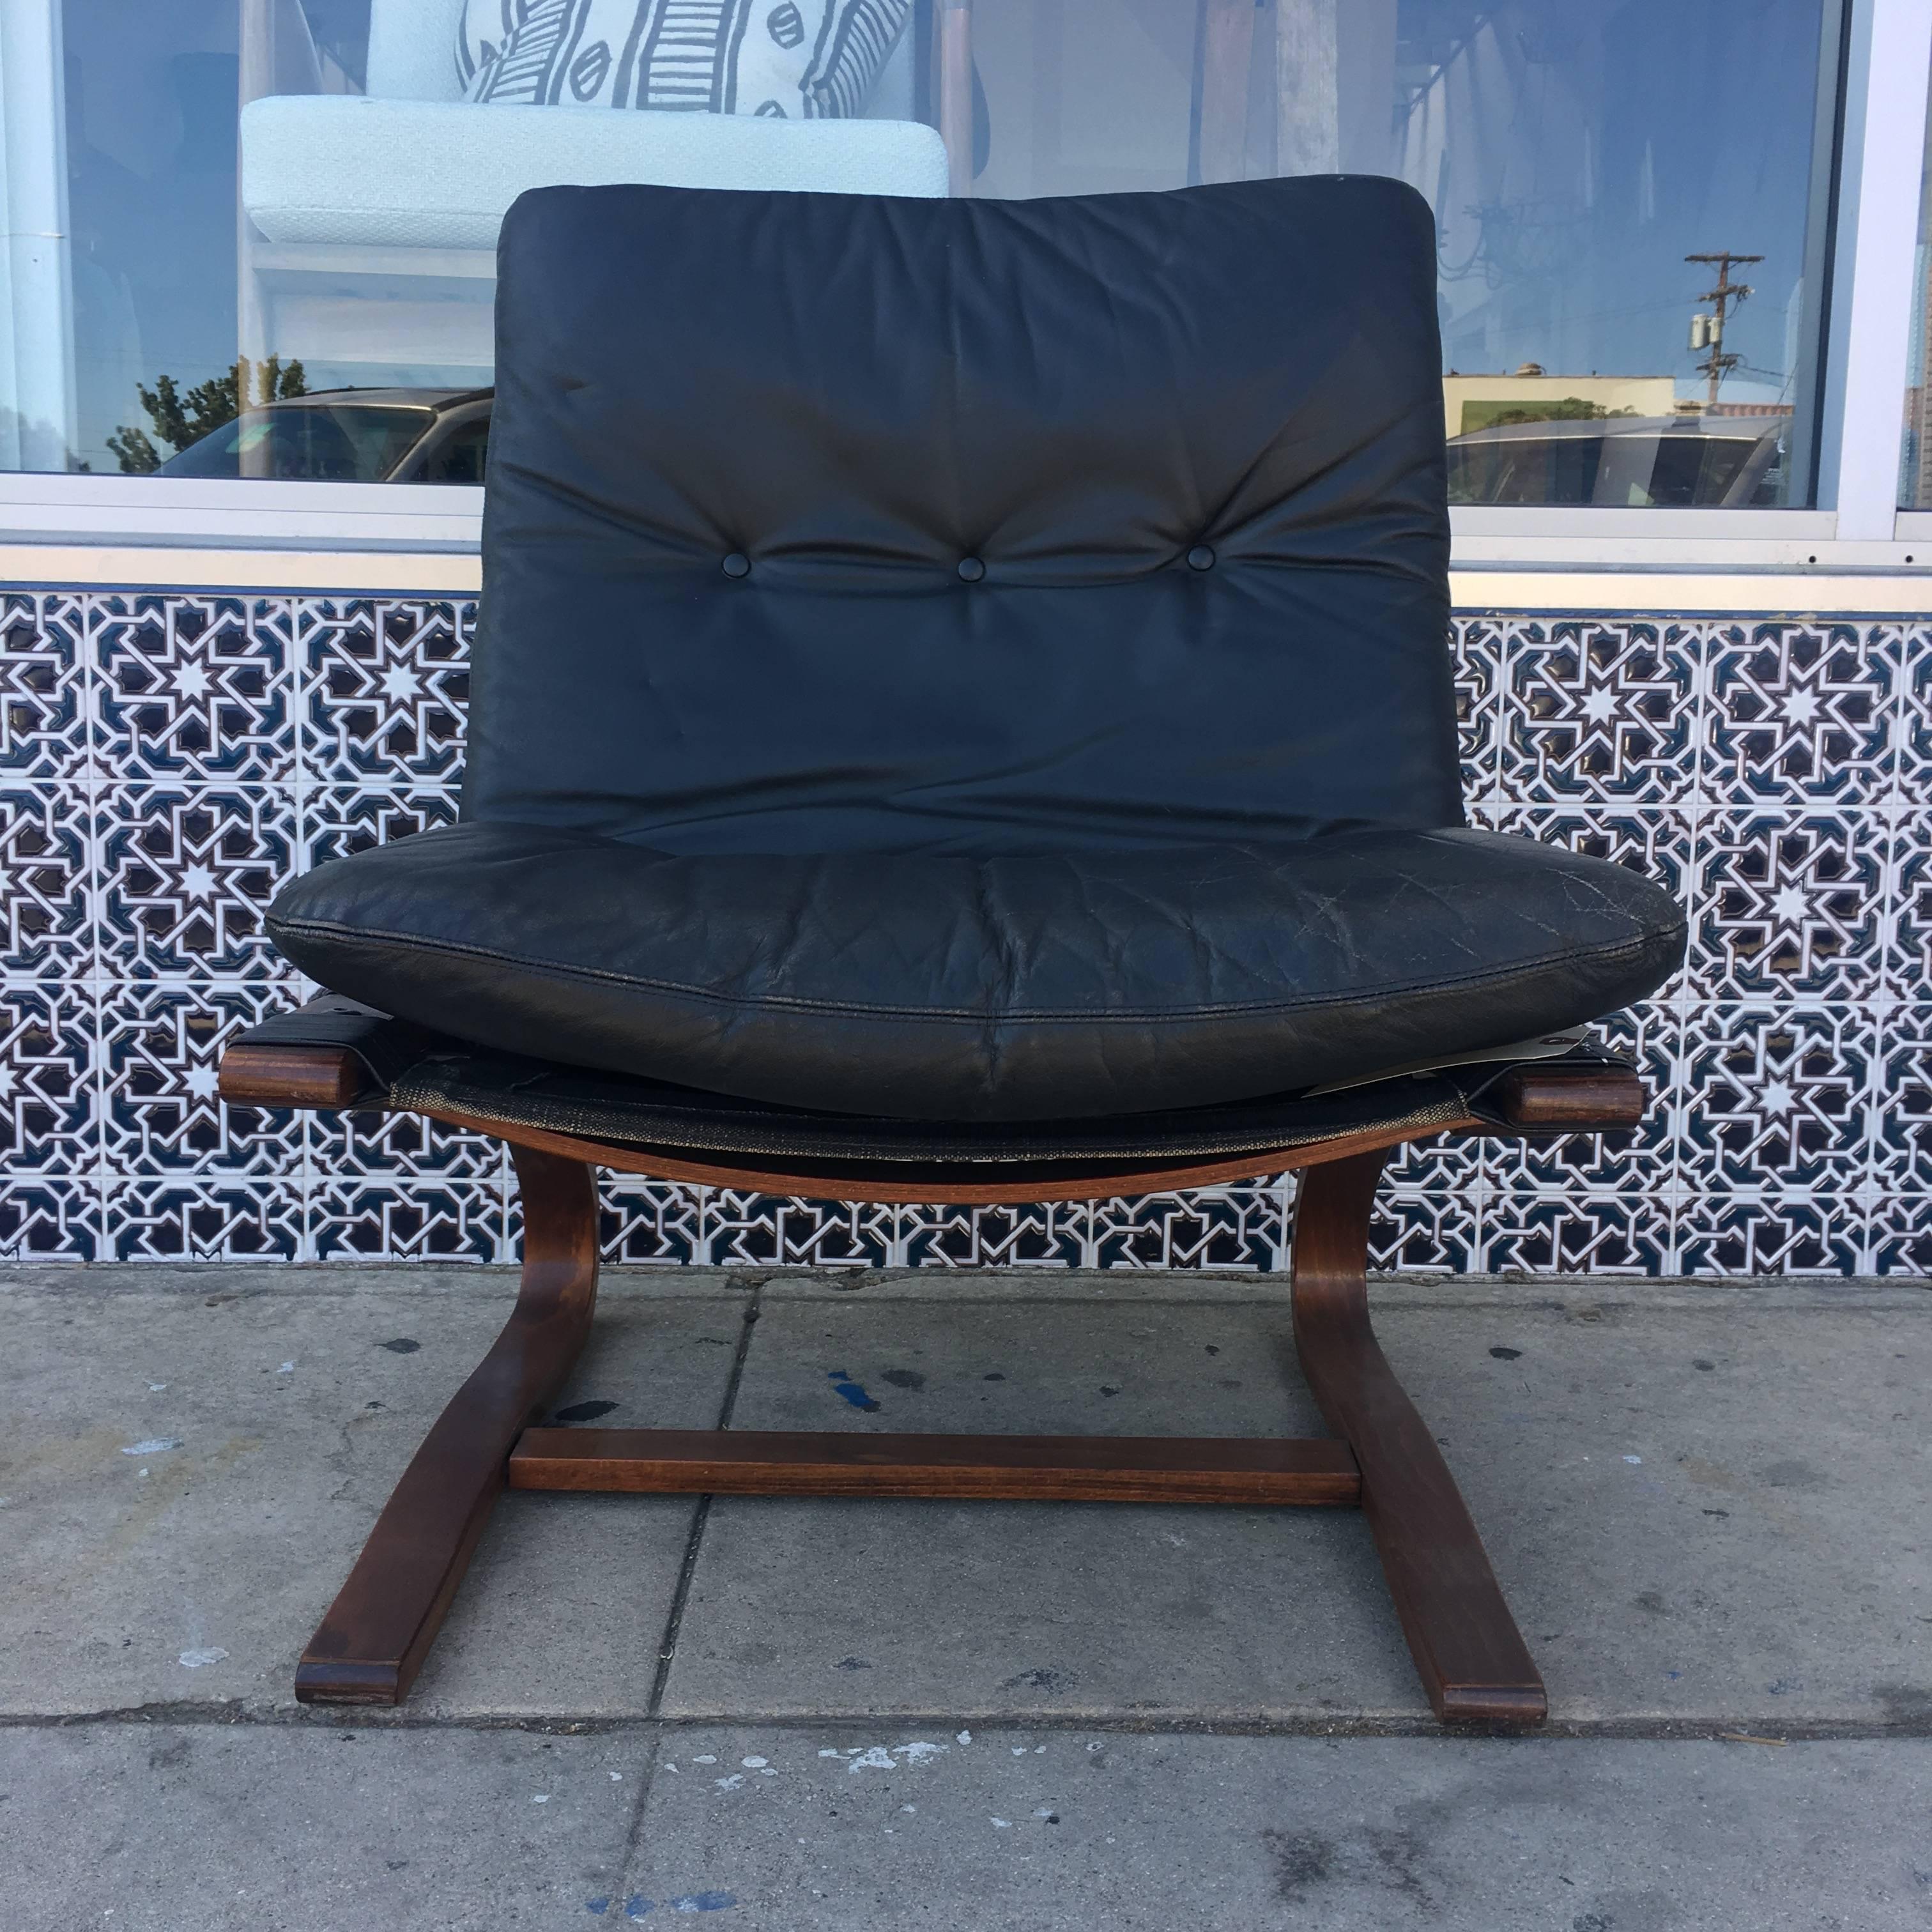 Pair of Danish leather lounge chairs with removable black leather upholstery and cantilevered wooden frames. Measures: Seat depth 18